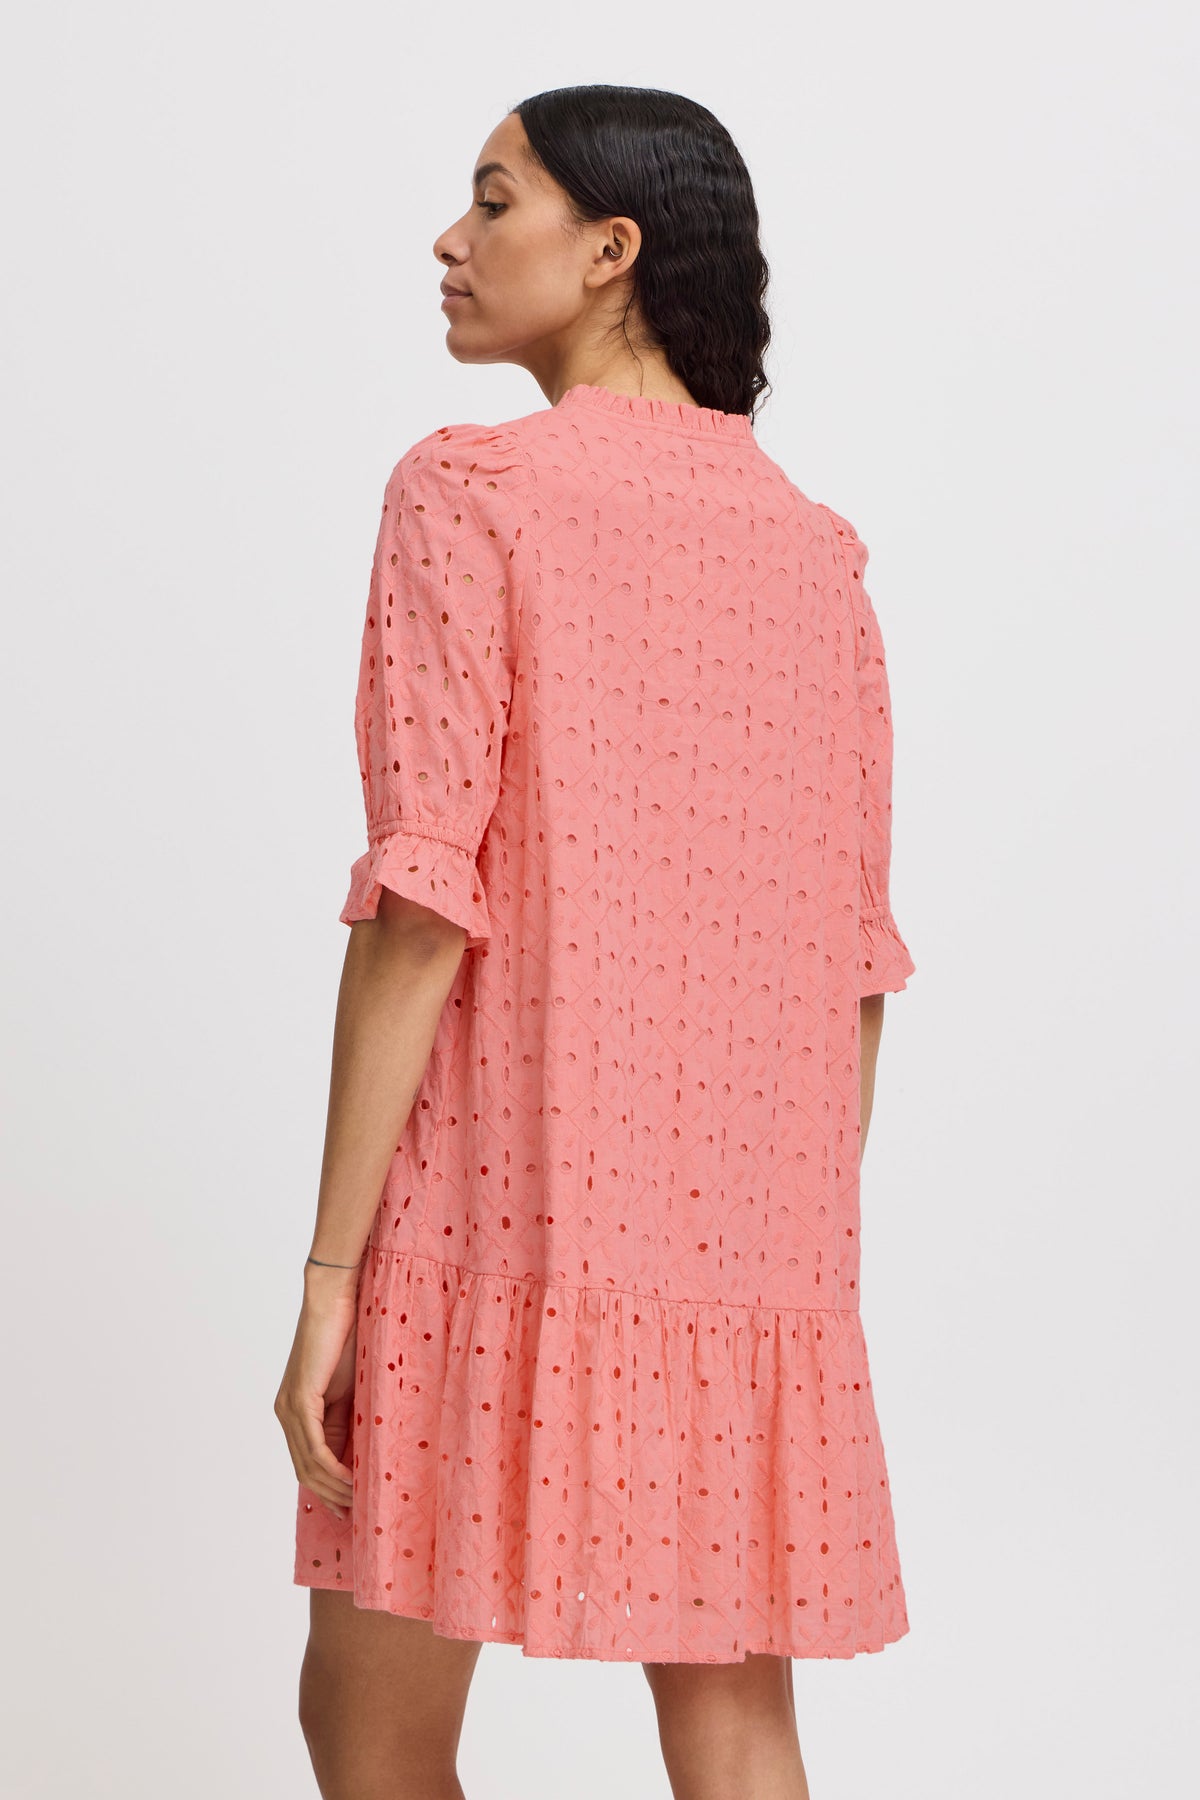 B.Young Bygalla Strawberry Pink Embroidered Layered Dress, 20814935